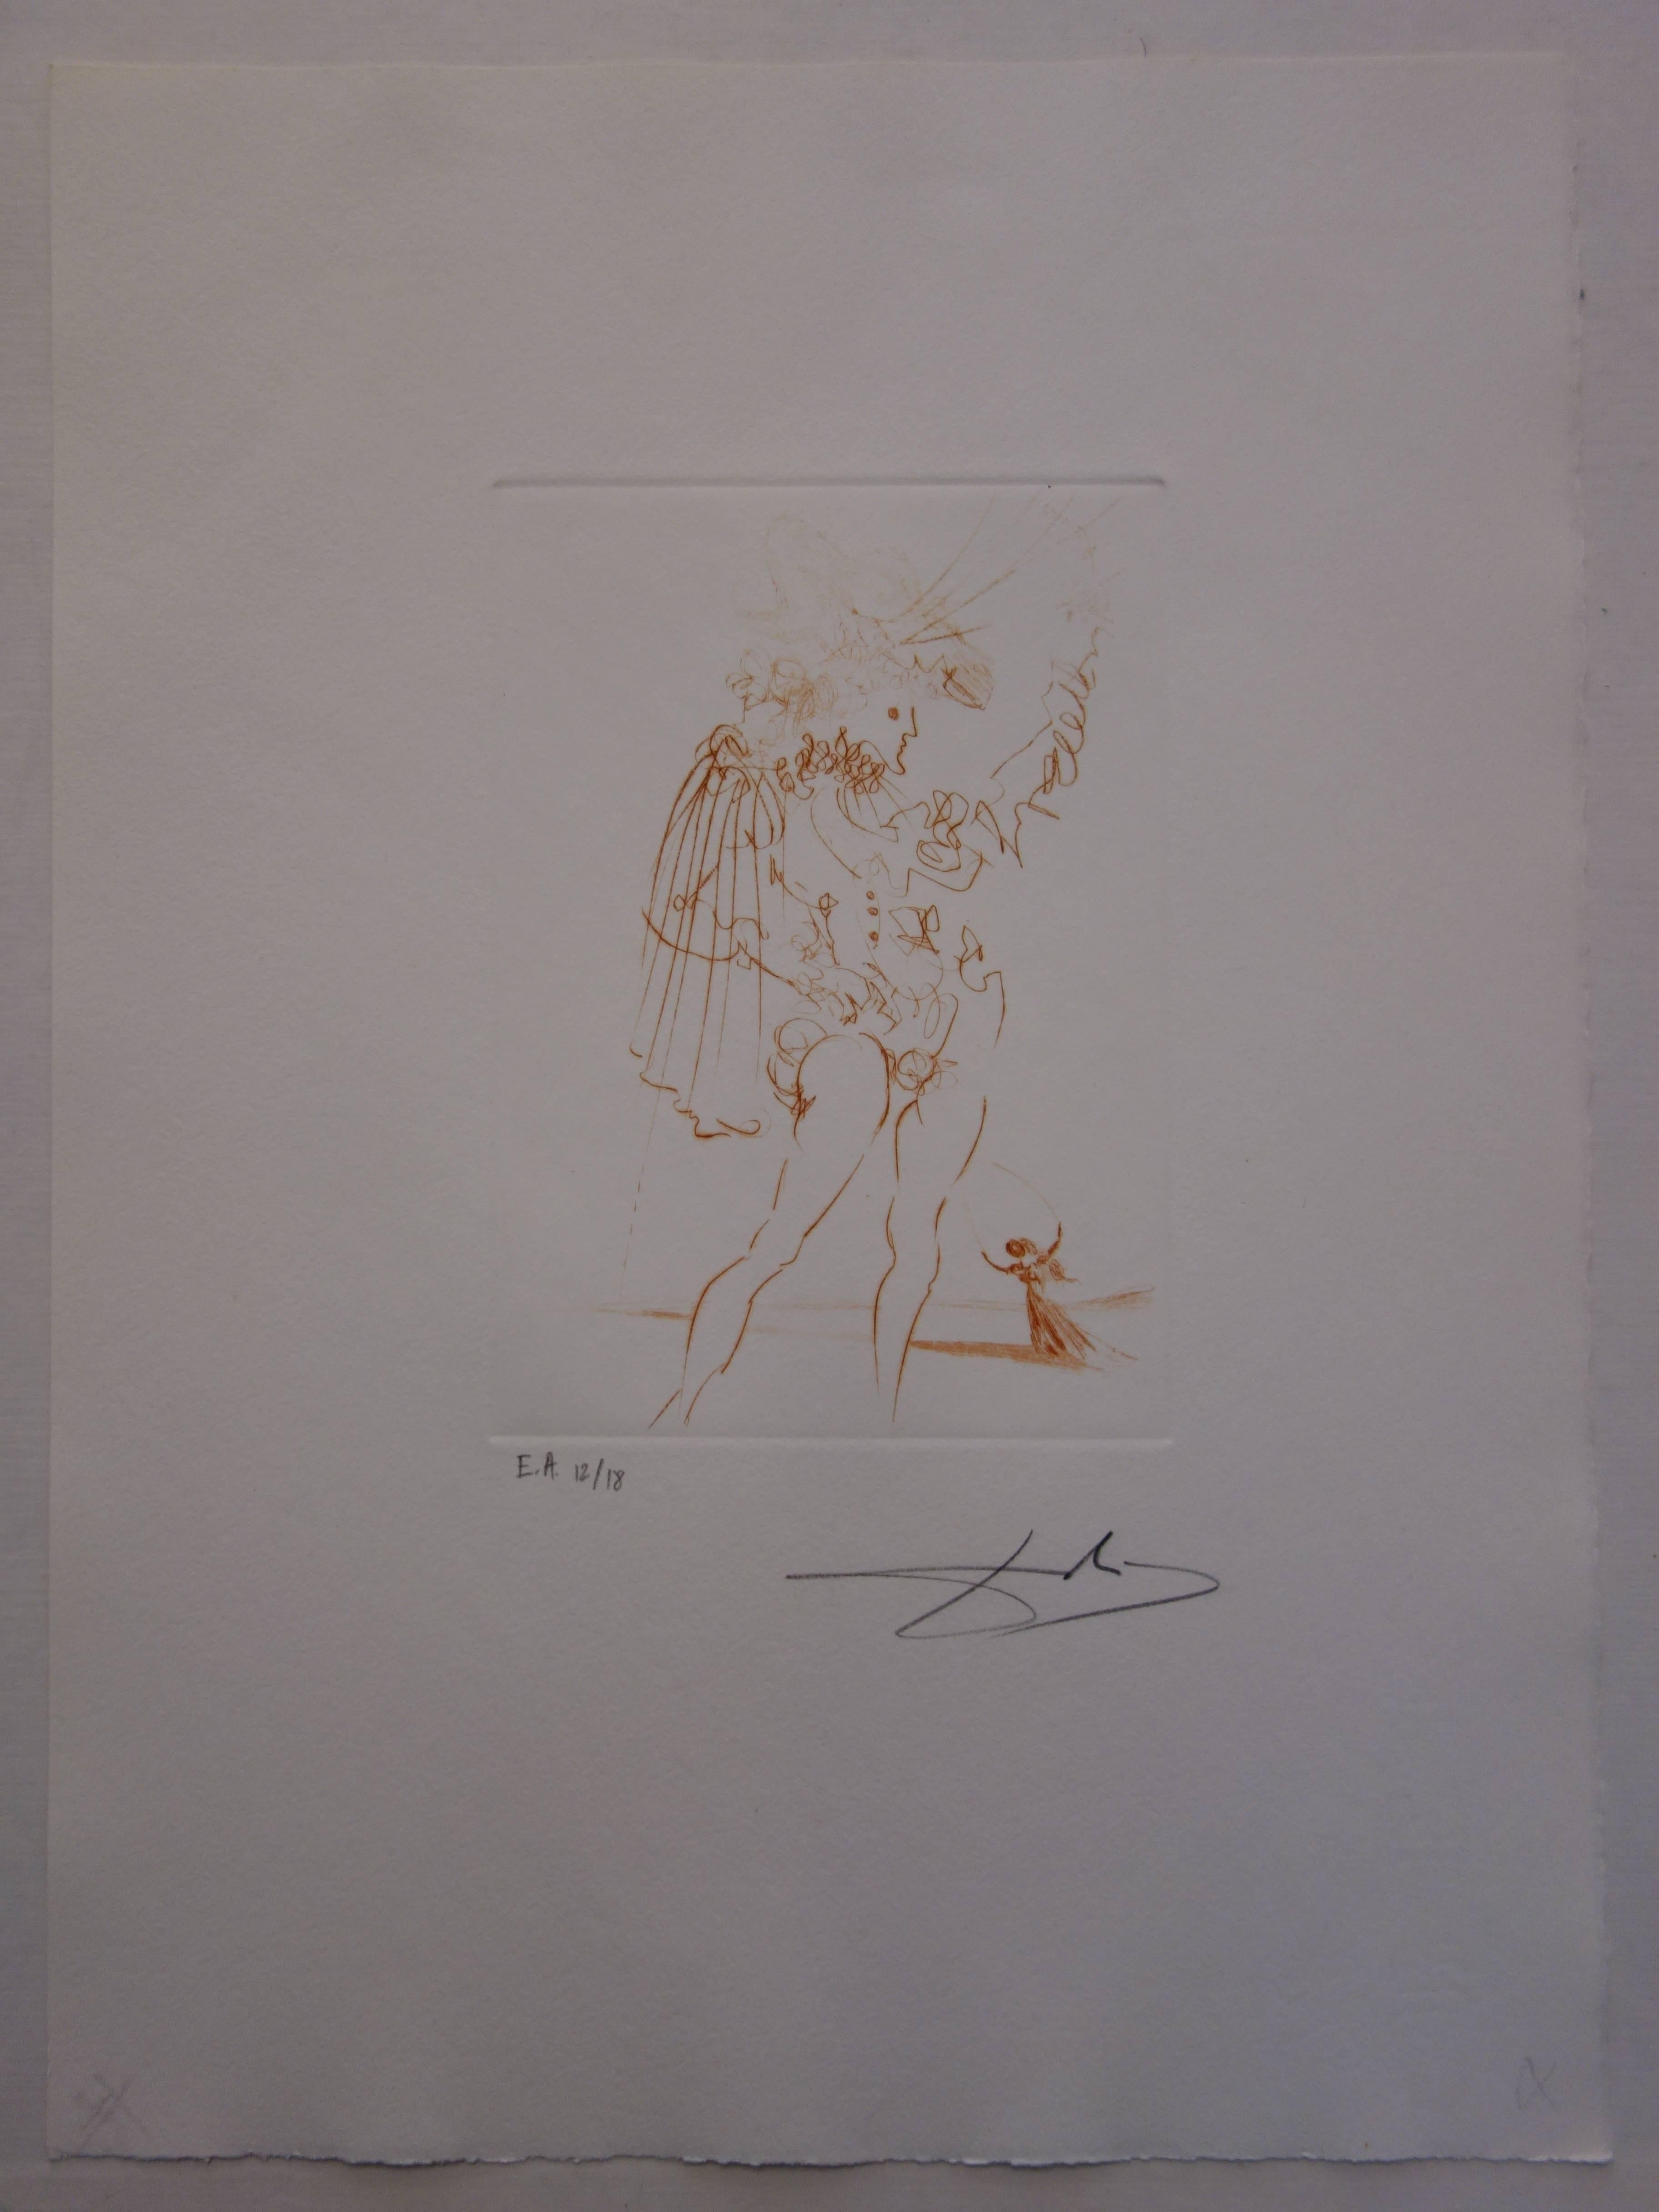 Much Ado About Shakespeare : Measure for Measure - Original  Signed Etching - Surrealist Print by Salvador Dalí